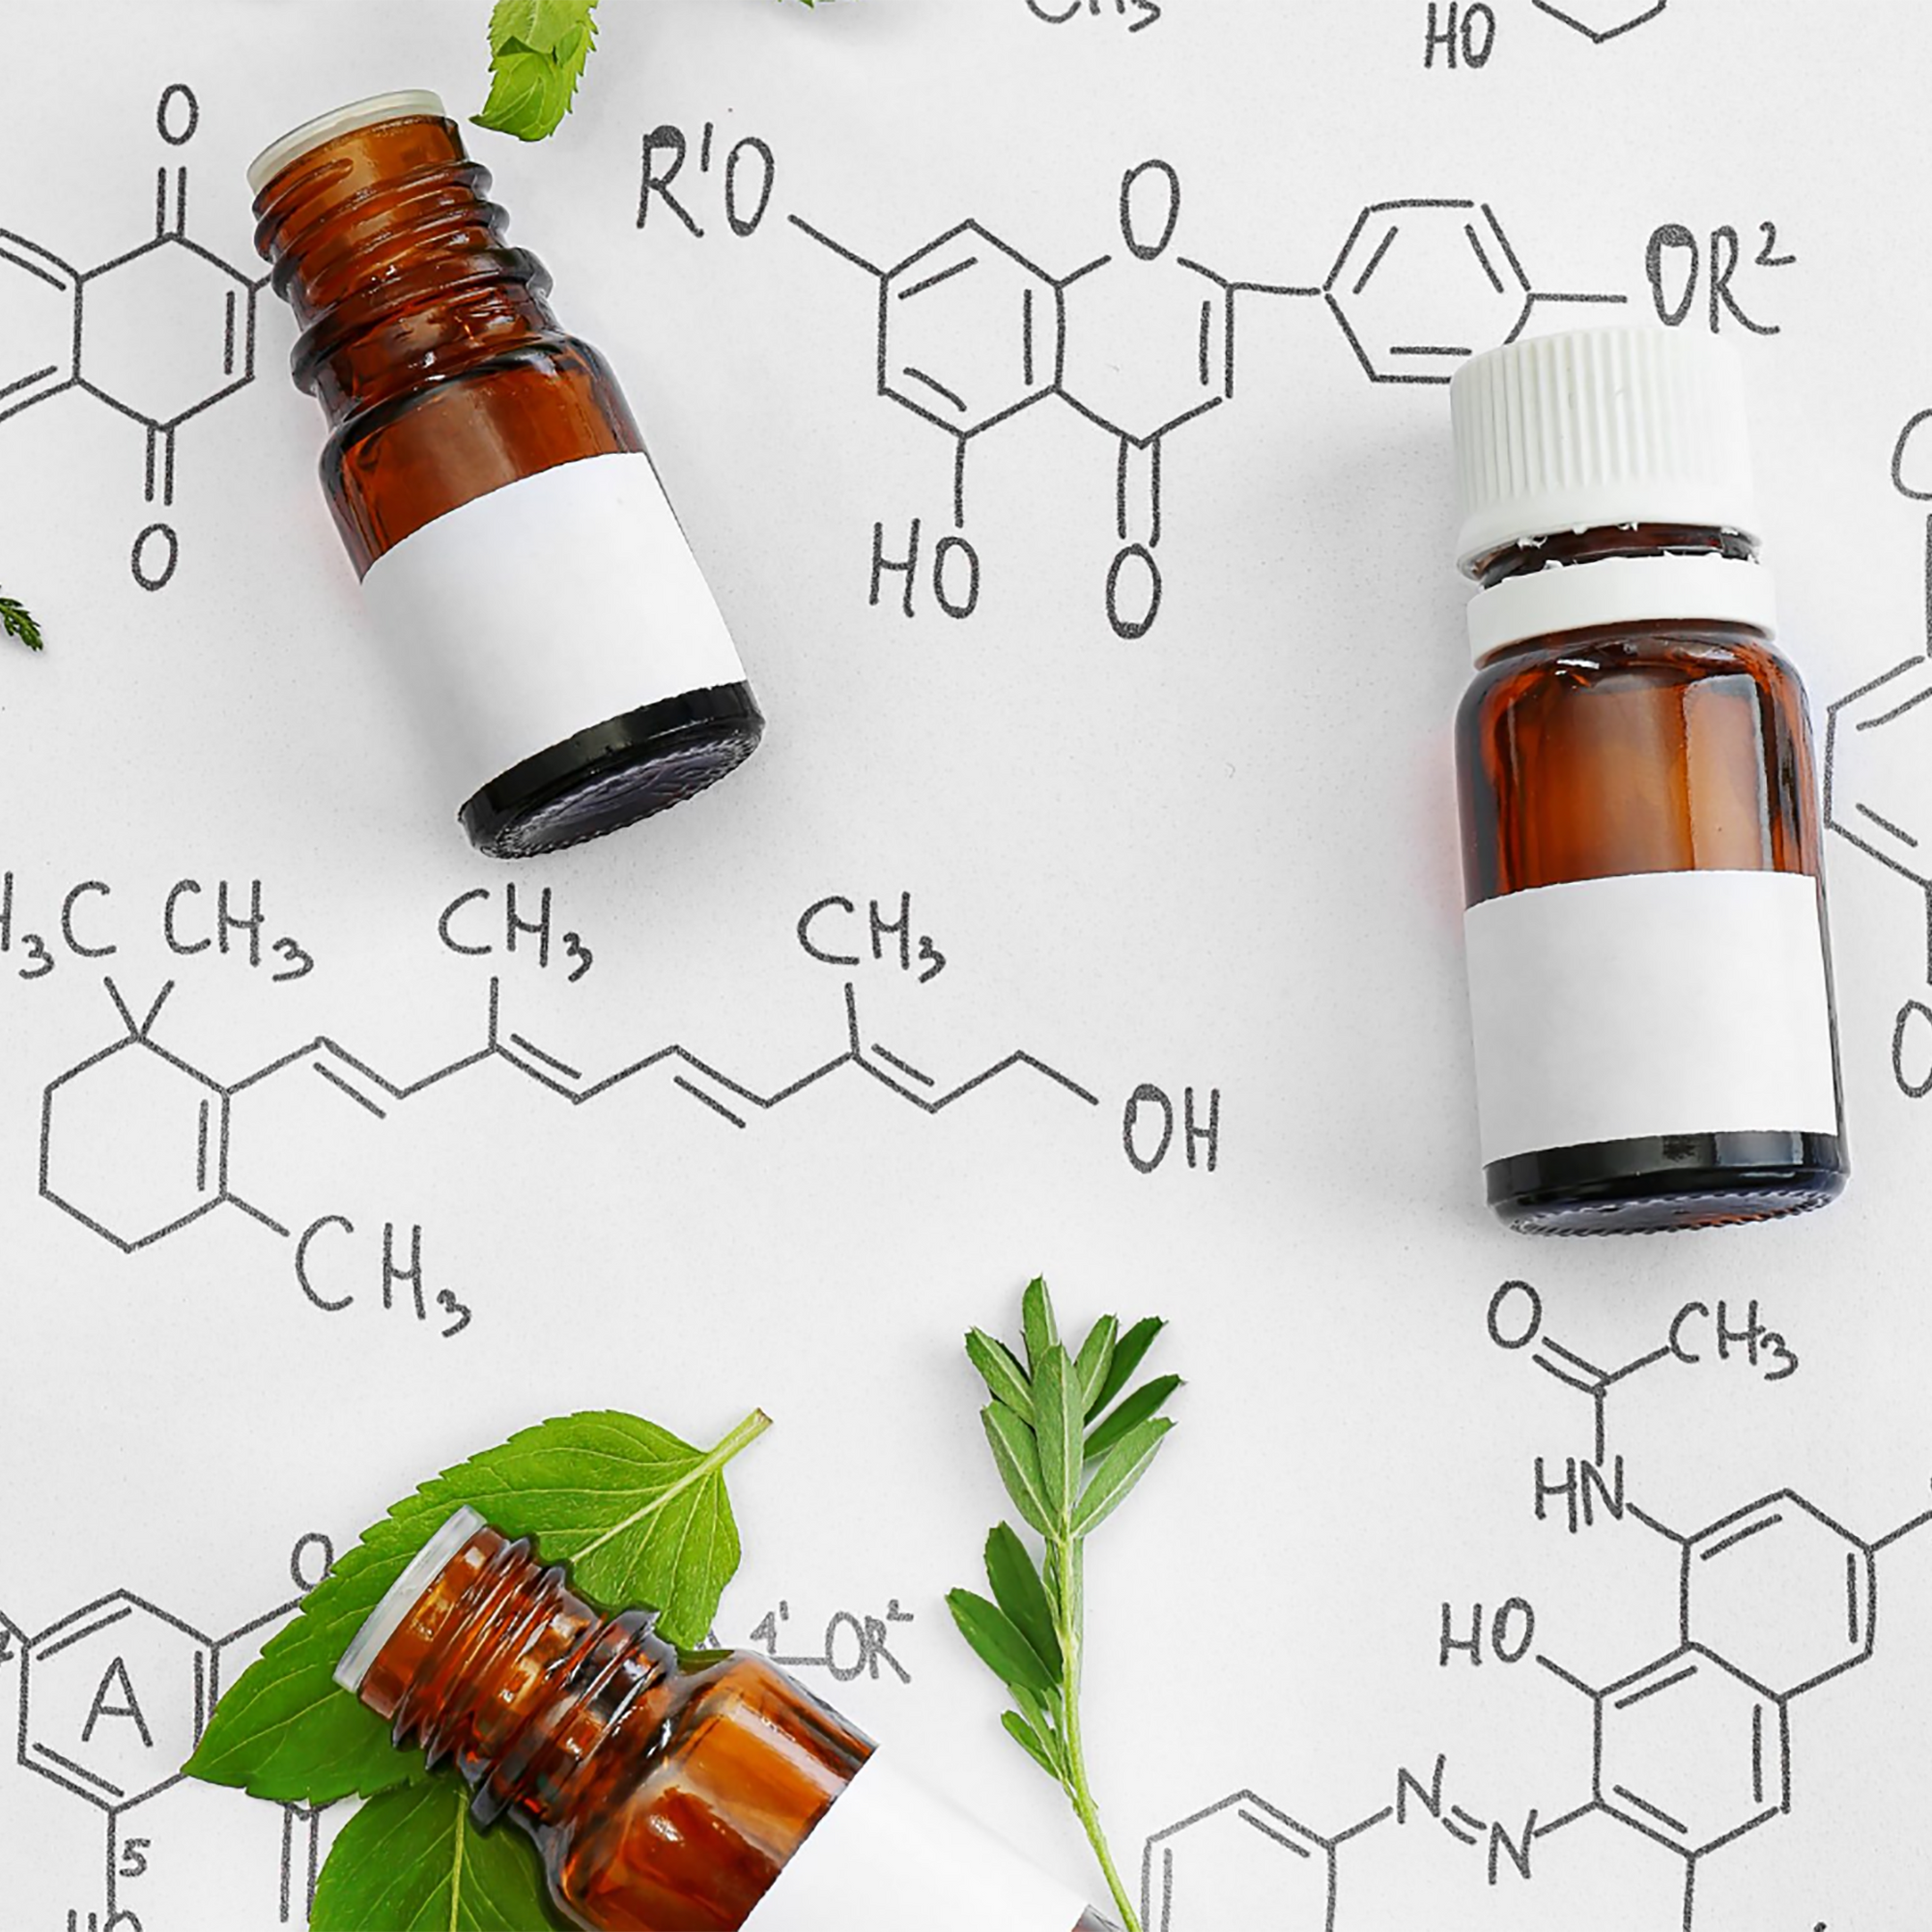 Active substances in Herbal Plants